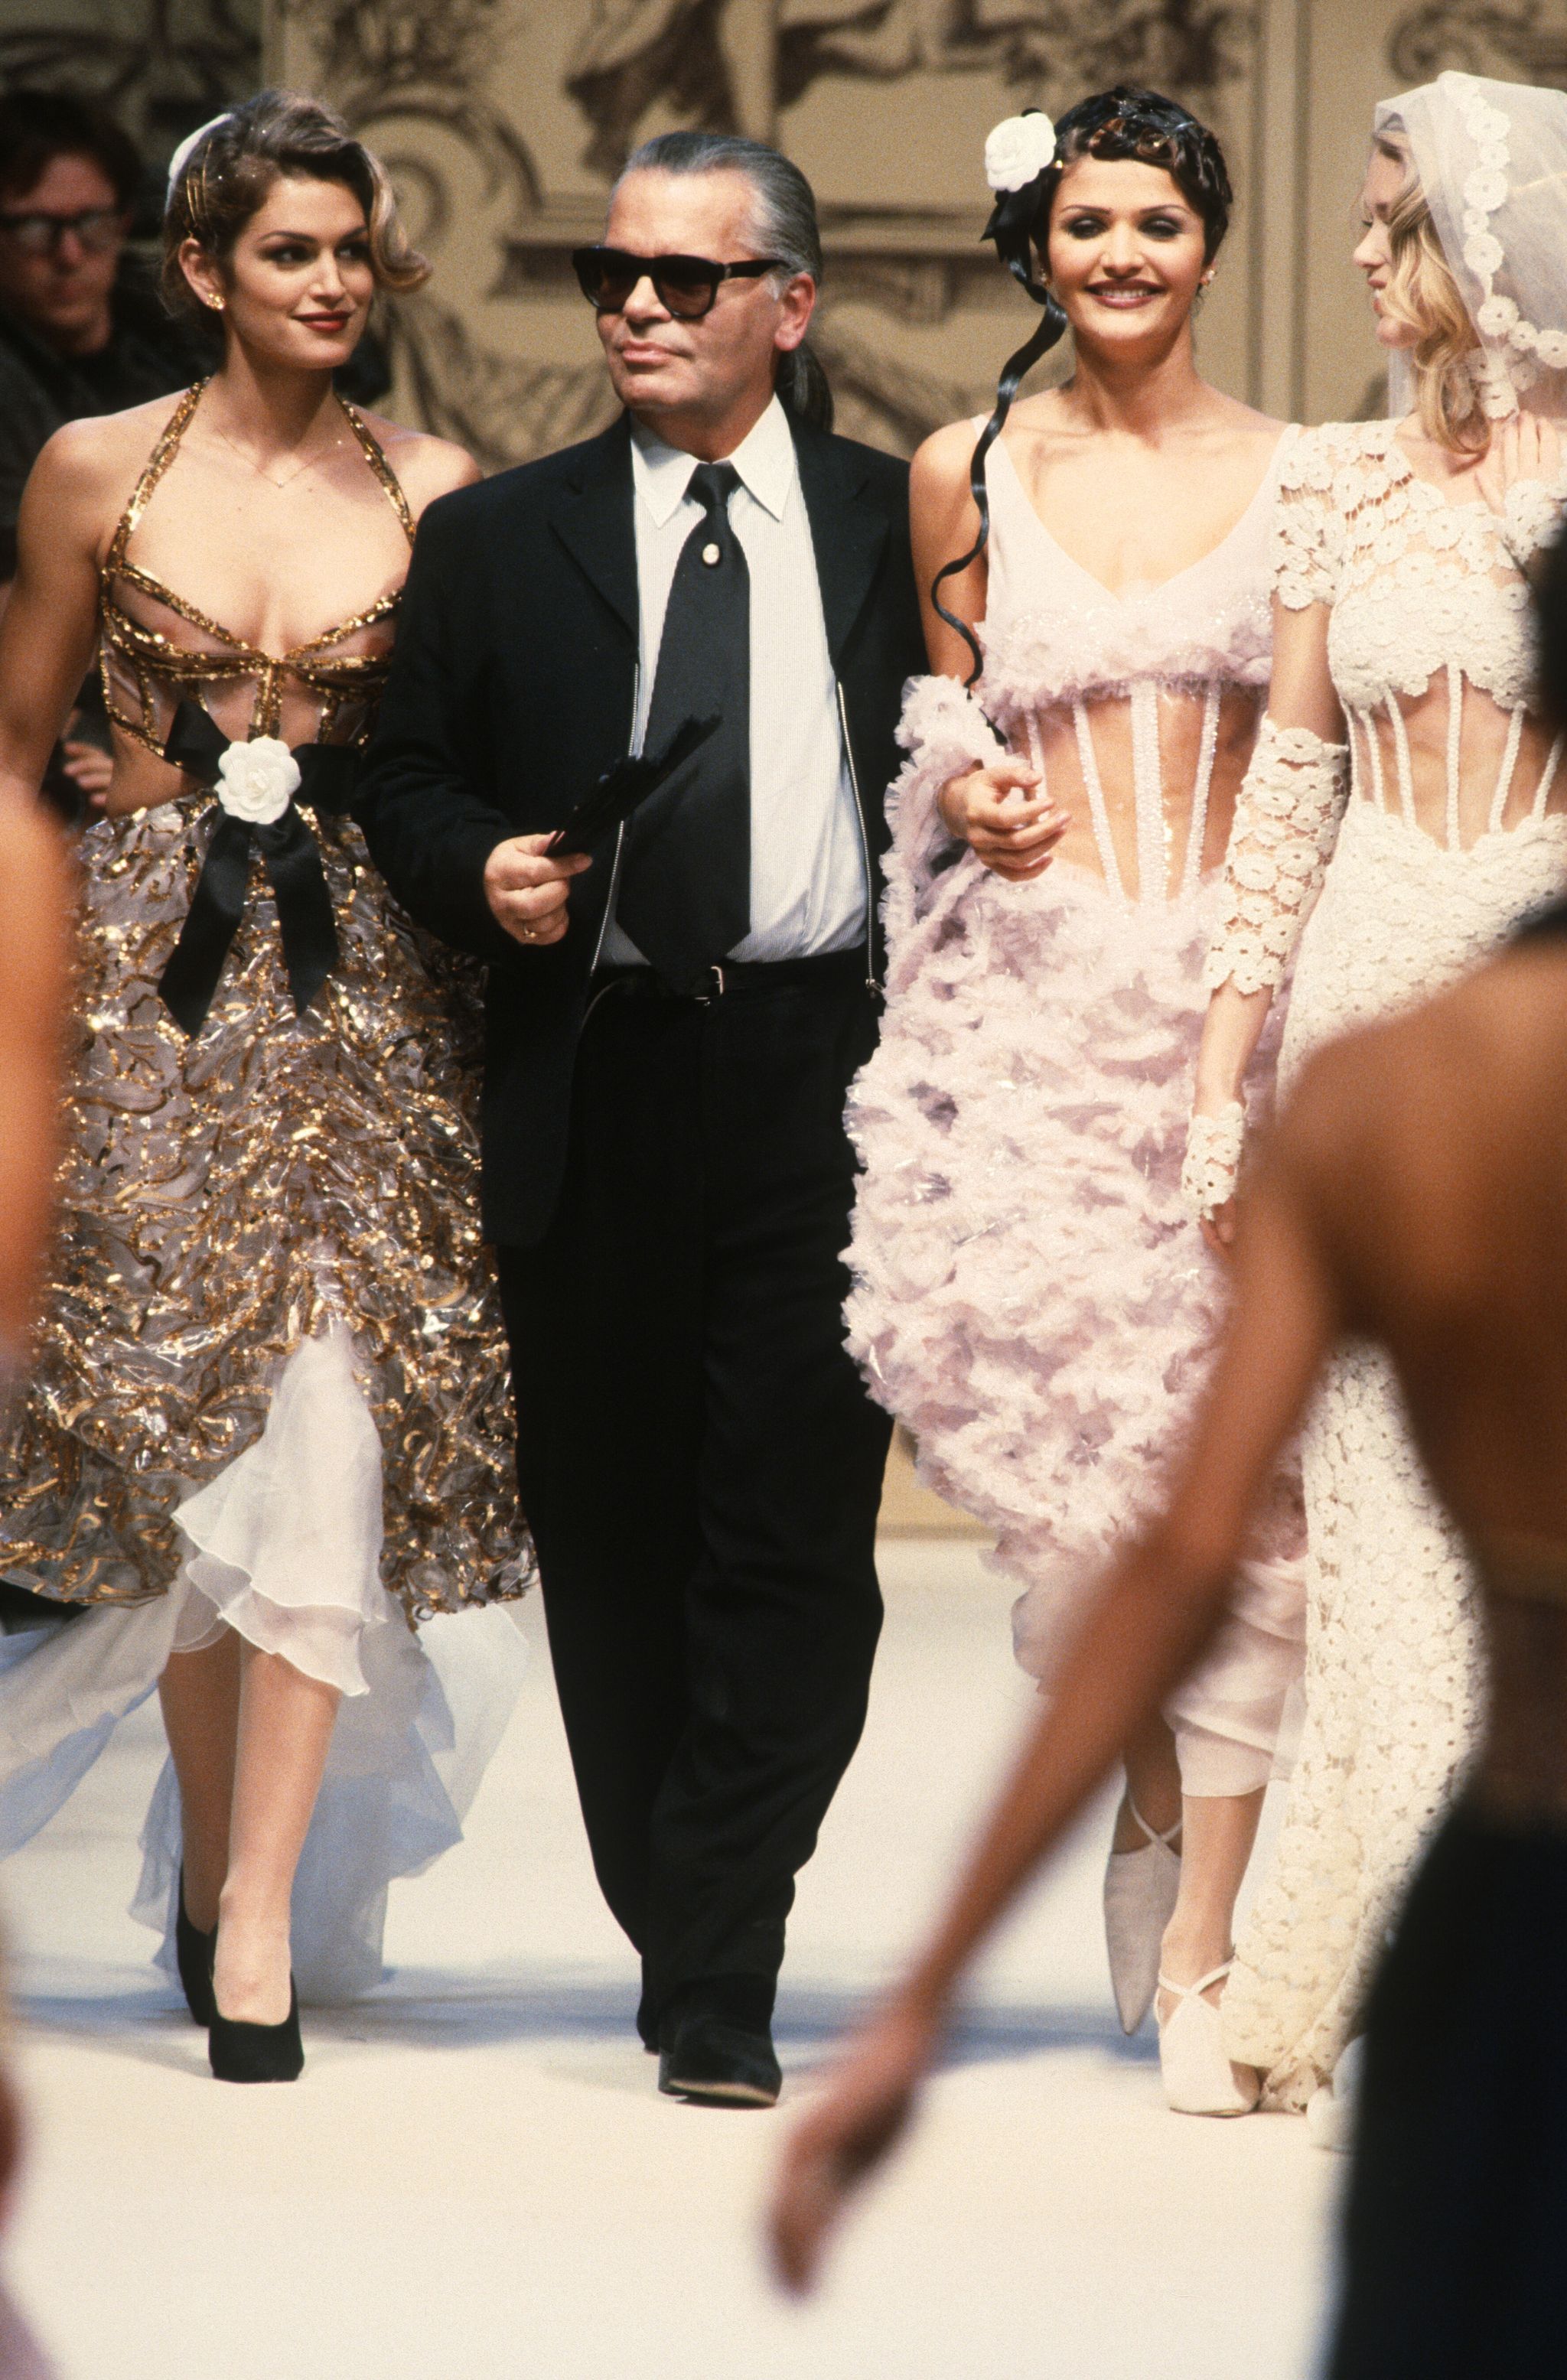 Chanel - Runway - Haute Couture Spring/Summer 1993-1994